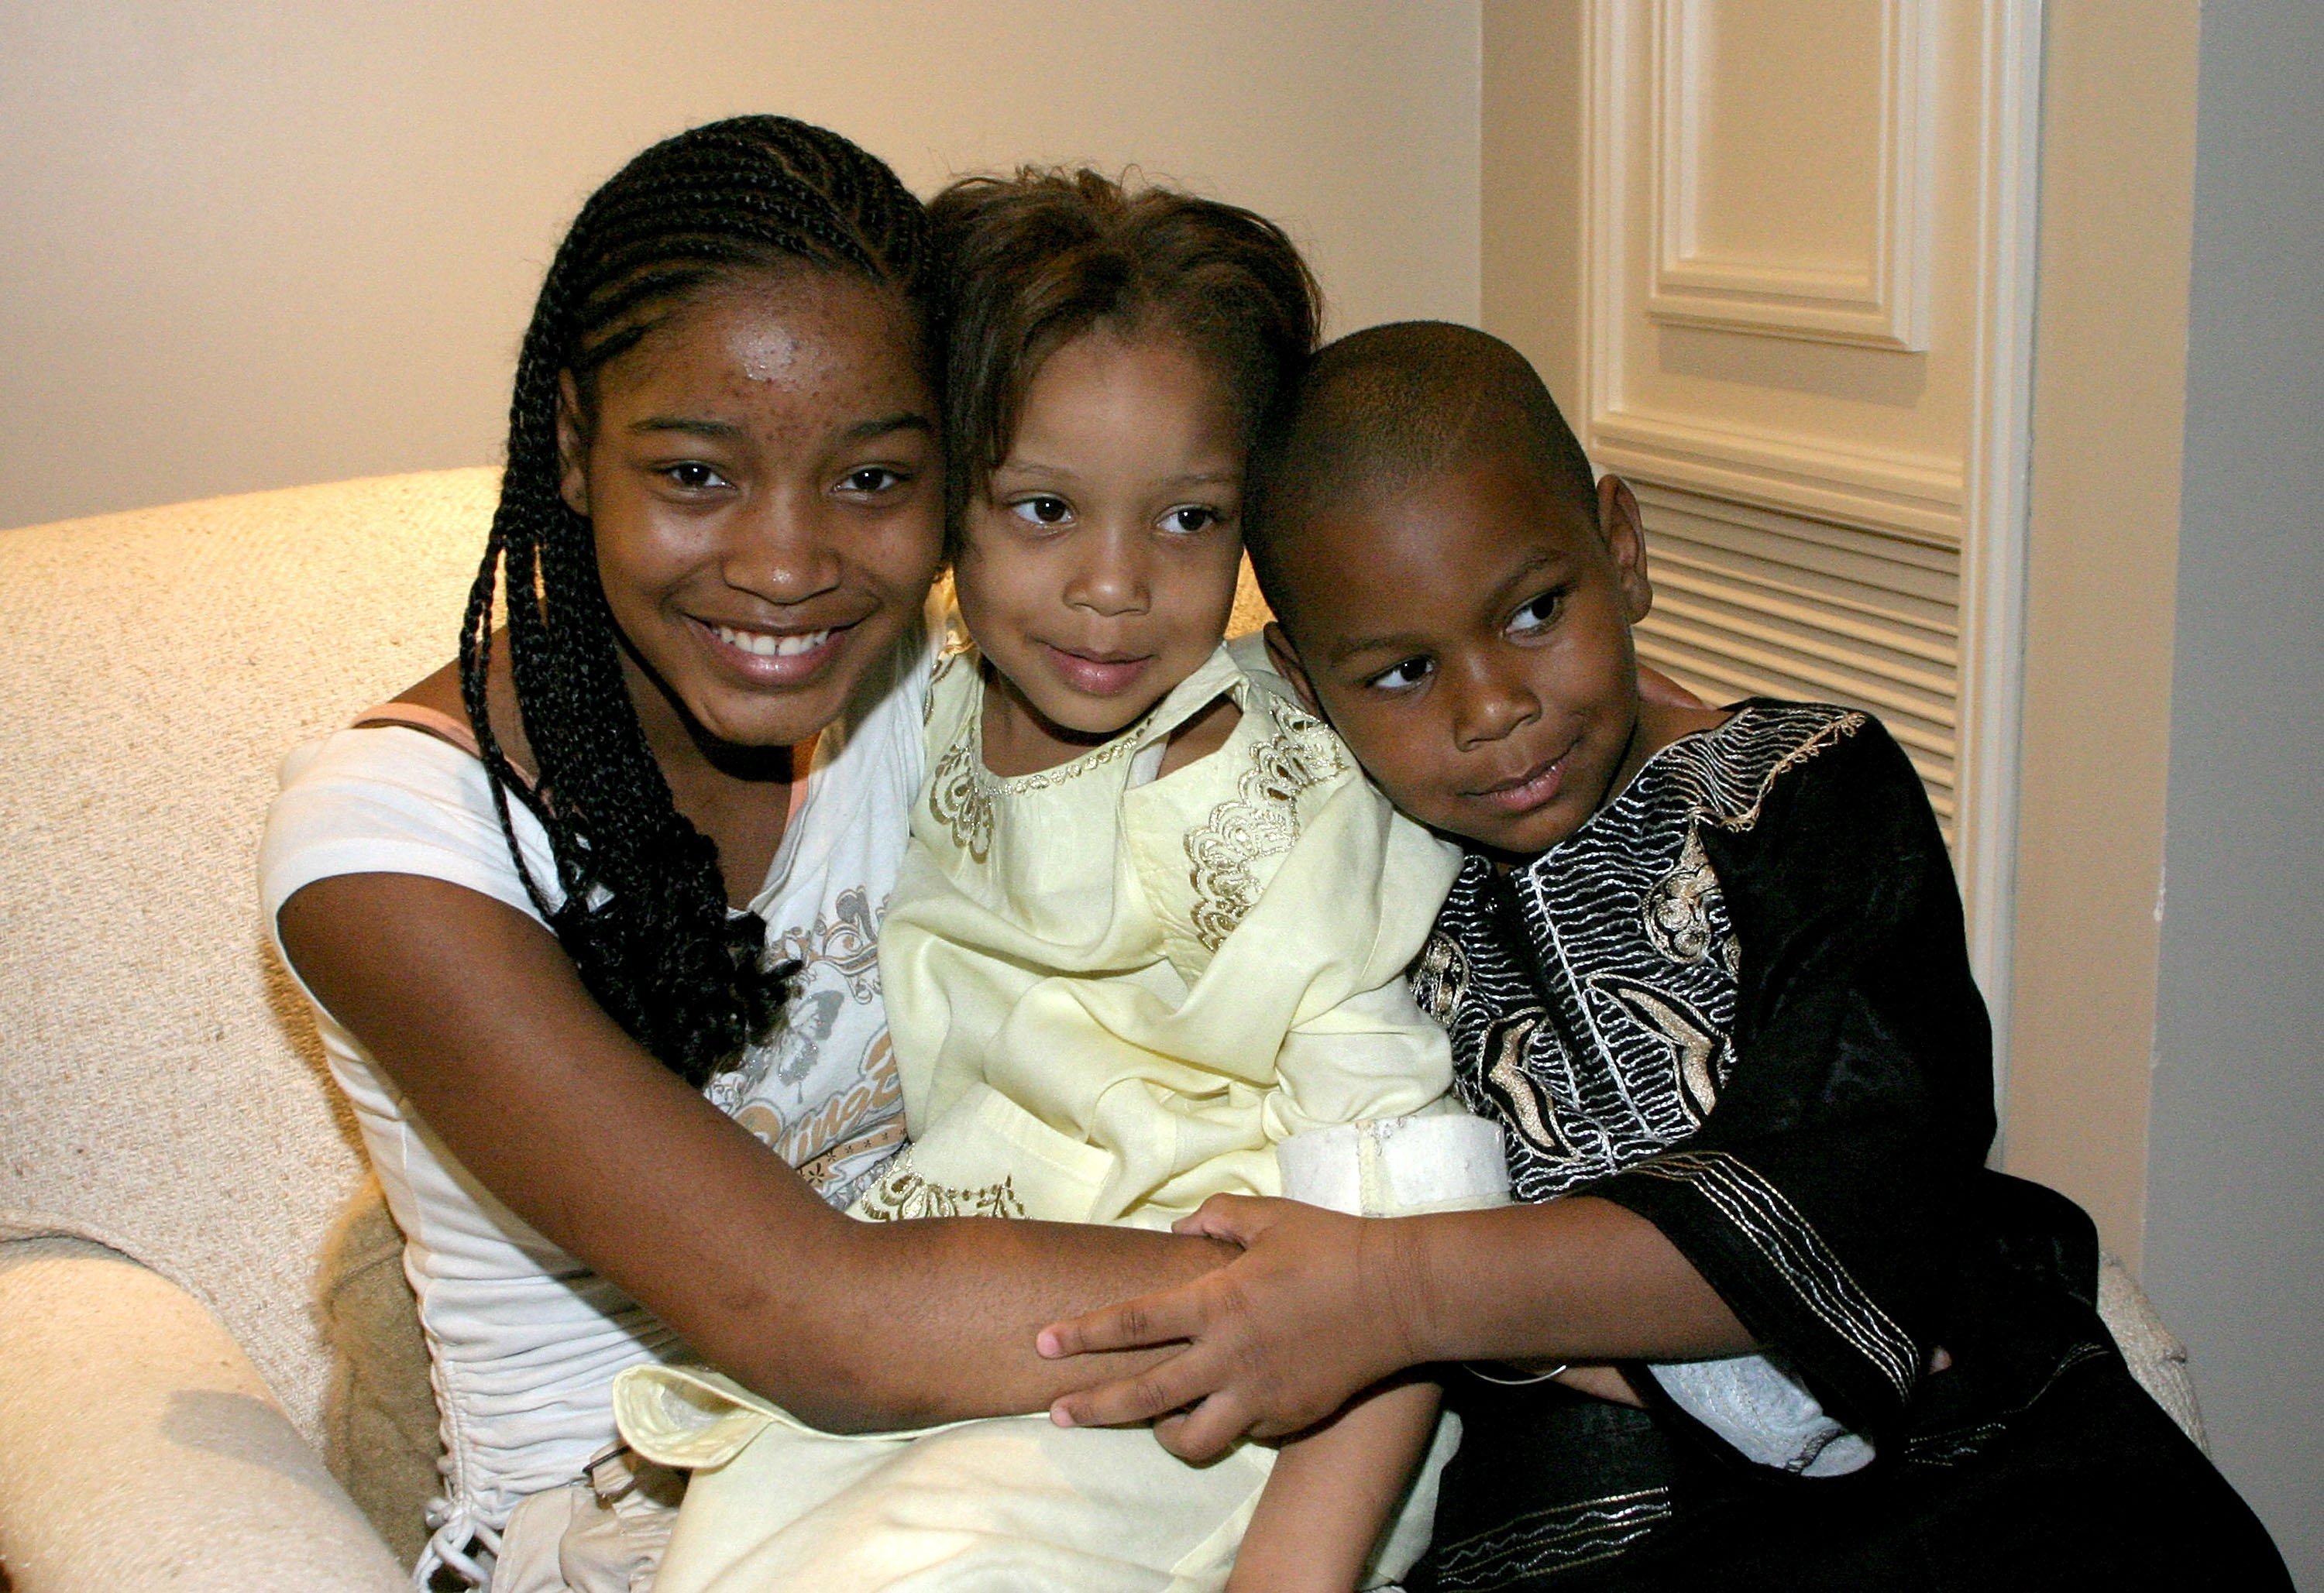 Keke Palmer smiles with her twin siblings Lawrencia and Lawrence Palmer as they attend the Lions Gate Films cocktail reception for the film "Akeelah and the Bee" during ShoWest 2006 held at the Bellagio Las Vegas on March 14, 2006, in Las Vegas, Nevada. | Sources: Getty Images